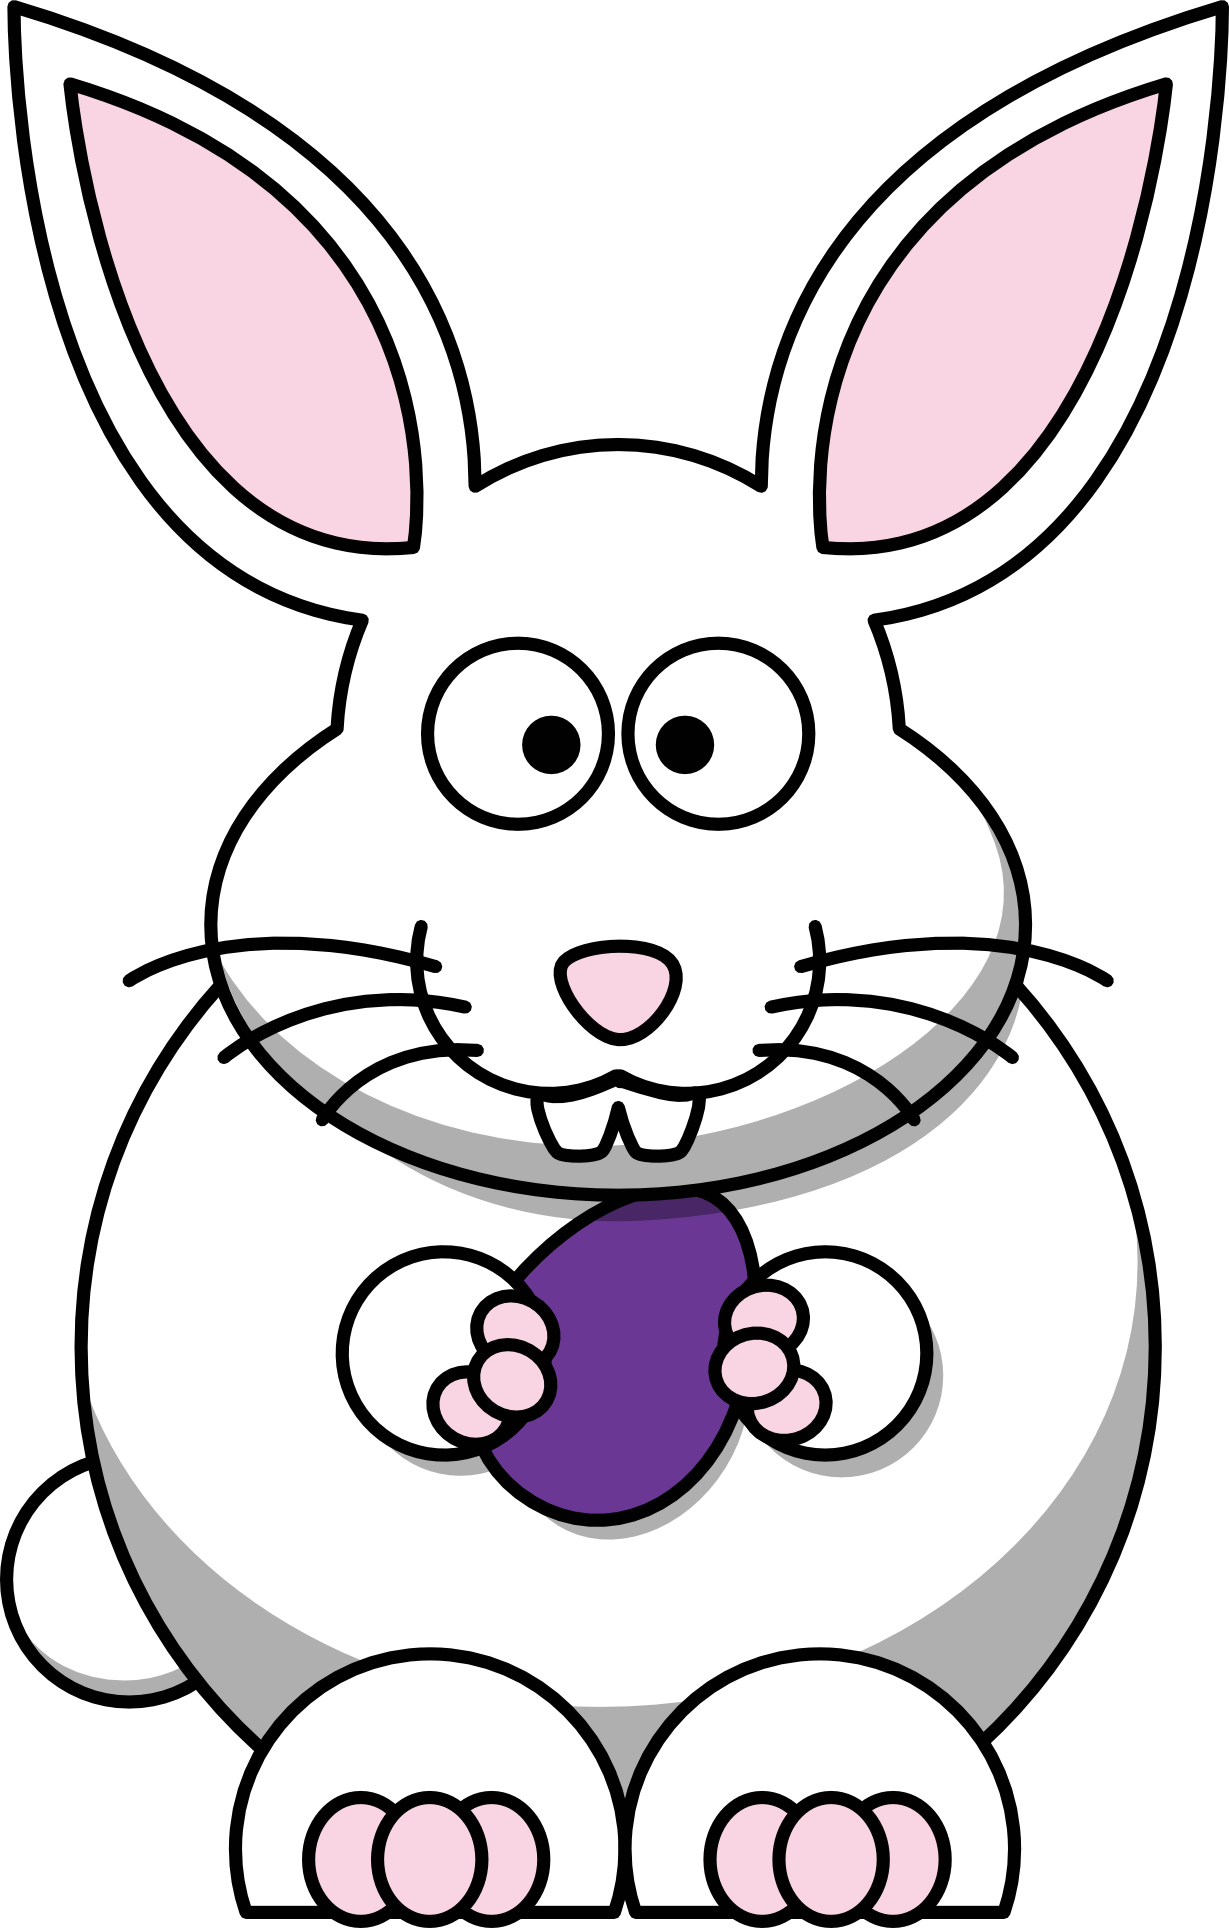 Easter Bunny Cartoon Pictures